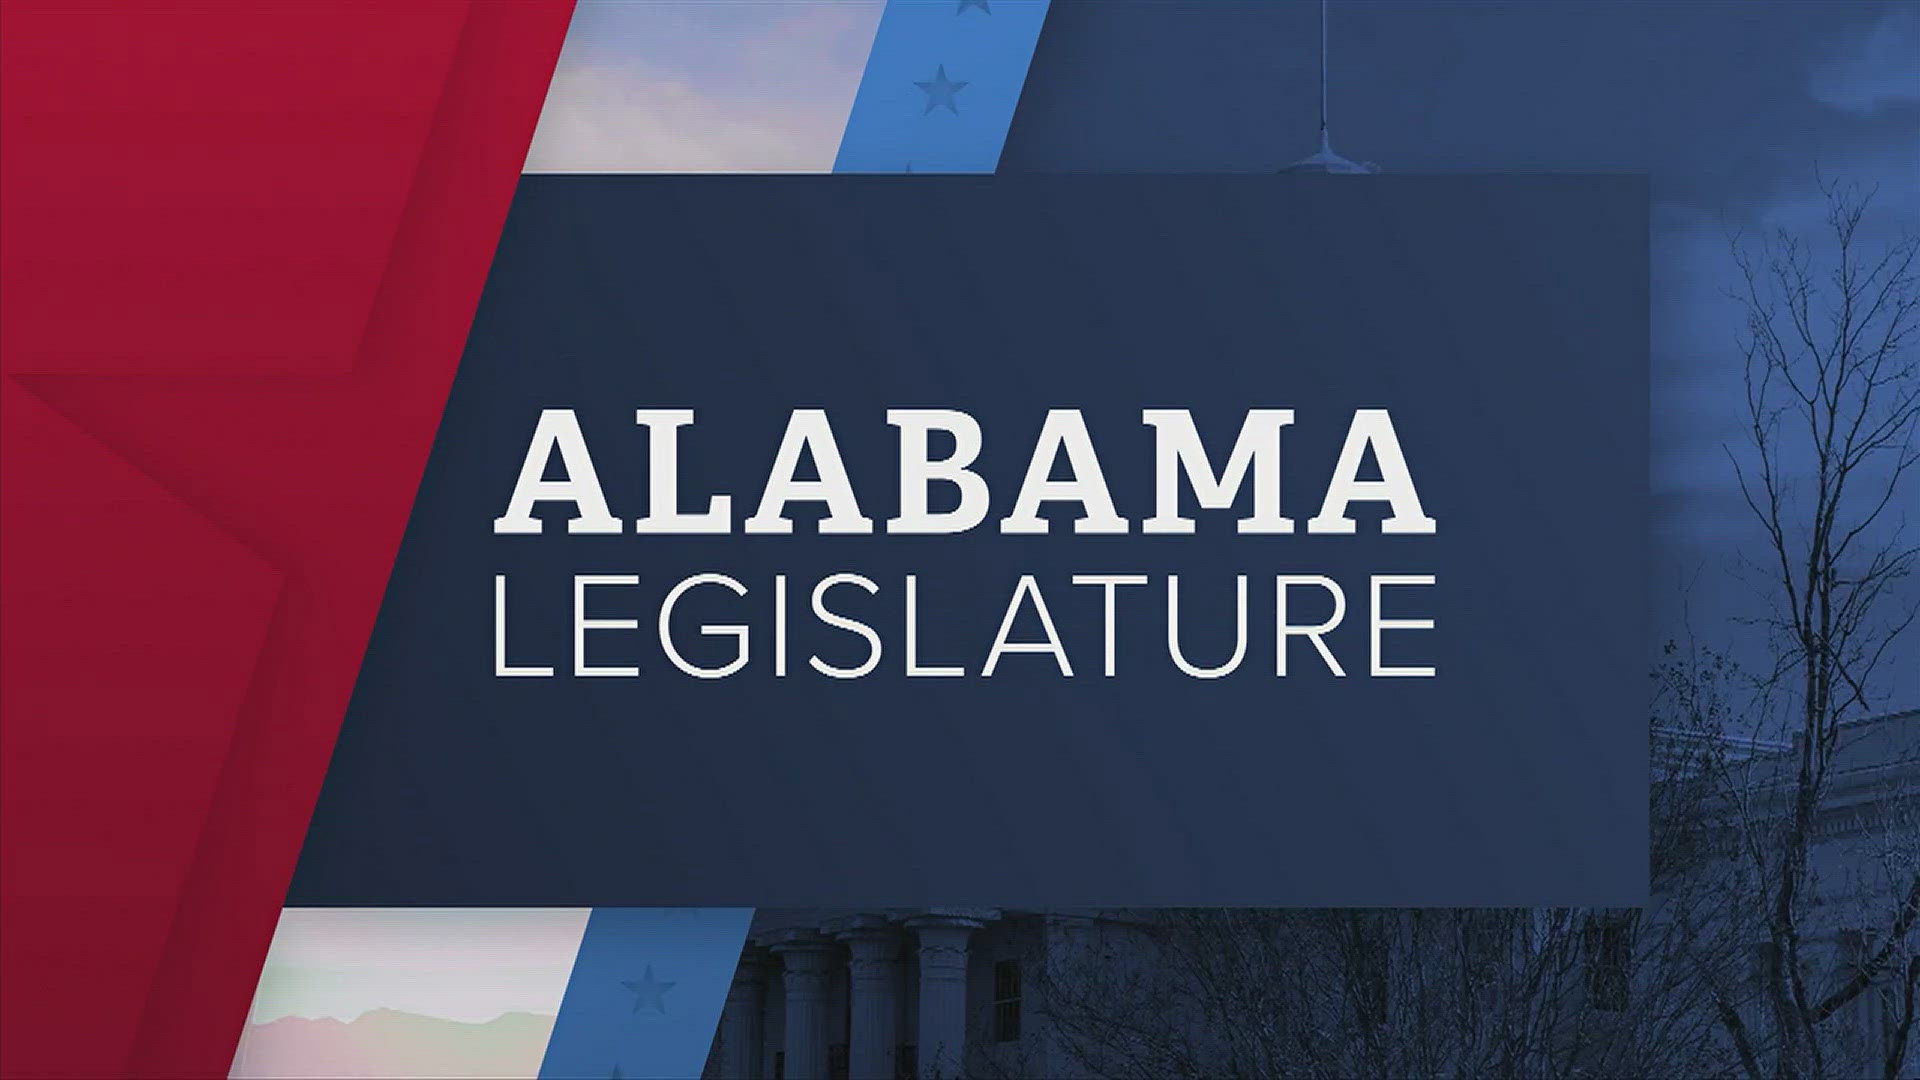 Gambling in Alabama remains in limbo as the latest bill stalls. Sen. Figures calls out male legislators over parental bill being killed.